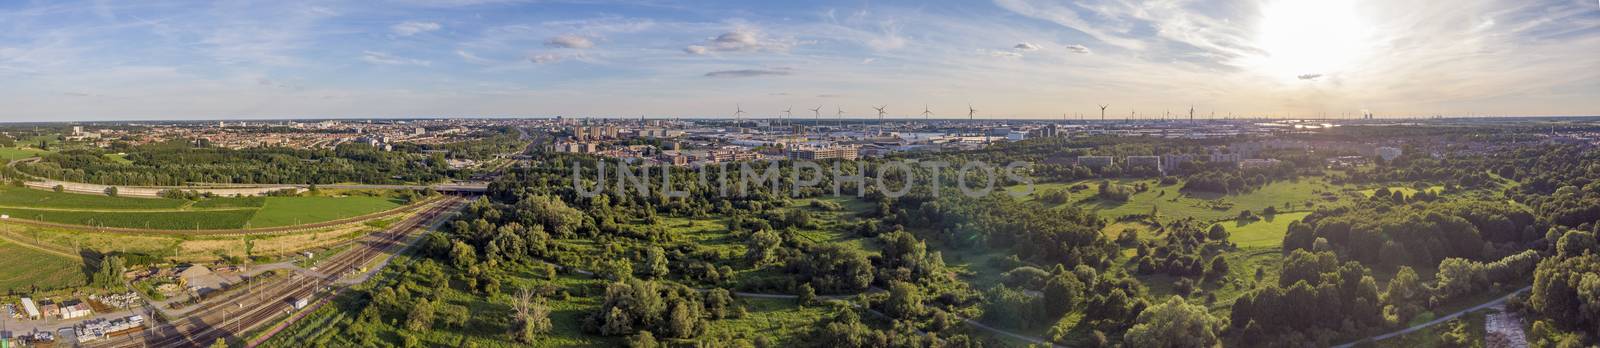 Aerial sunset view on Antwerp North area, with city and harbor in far distance, nature park oude landen in foreground by kb79